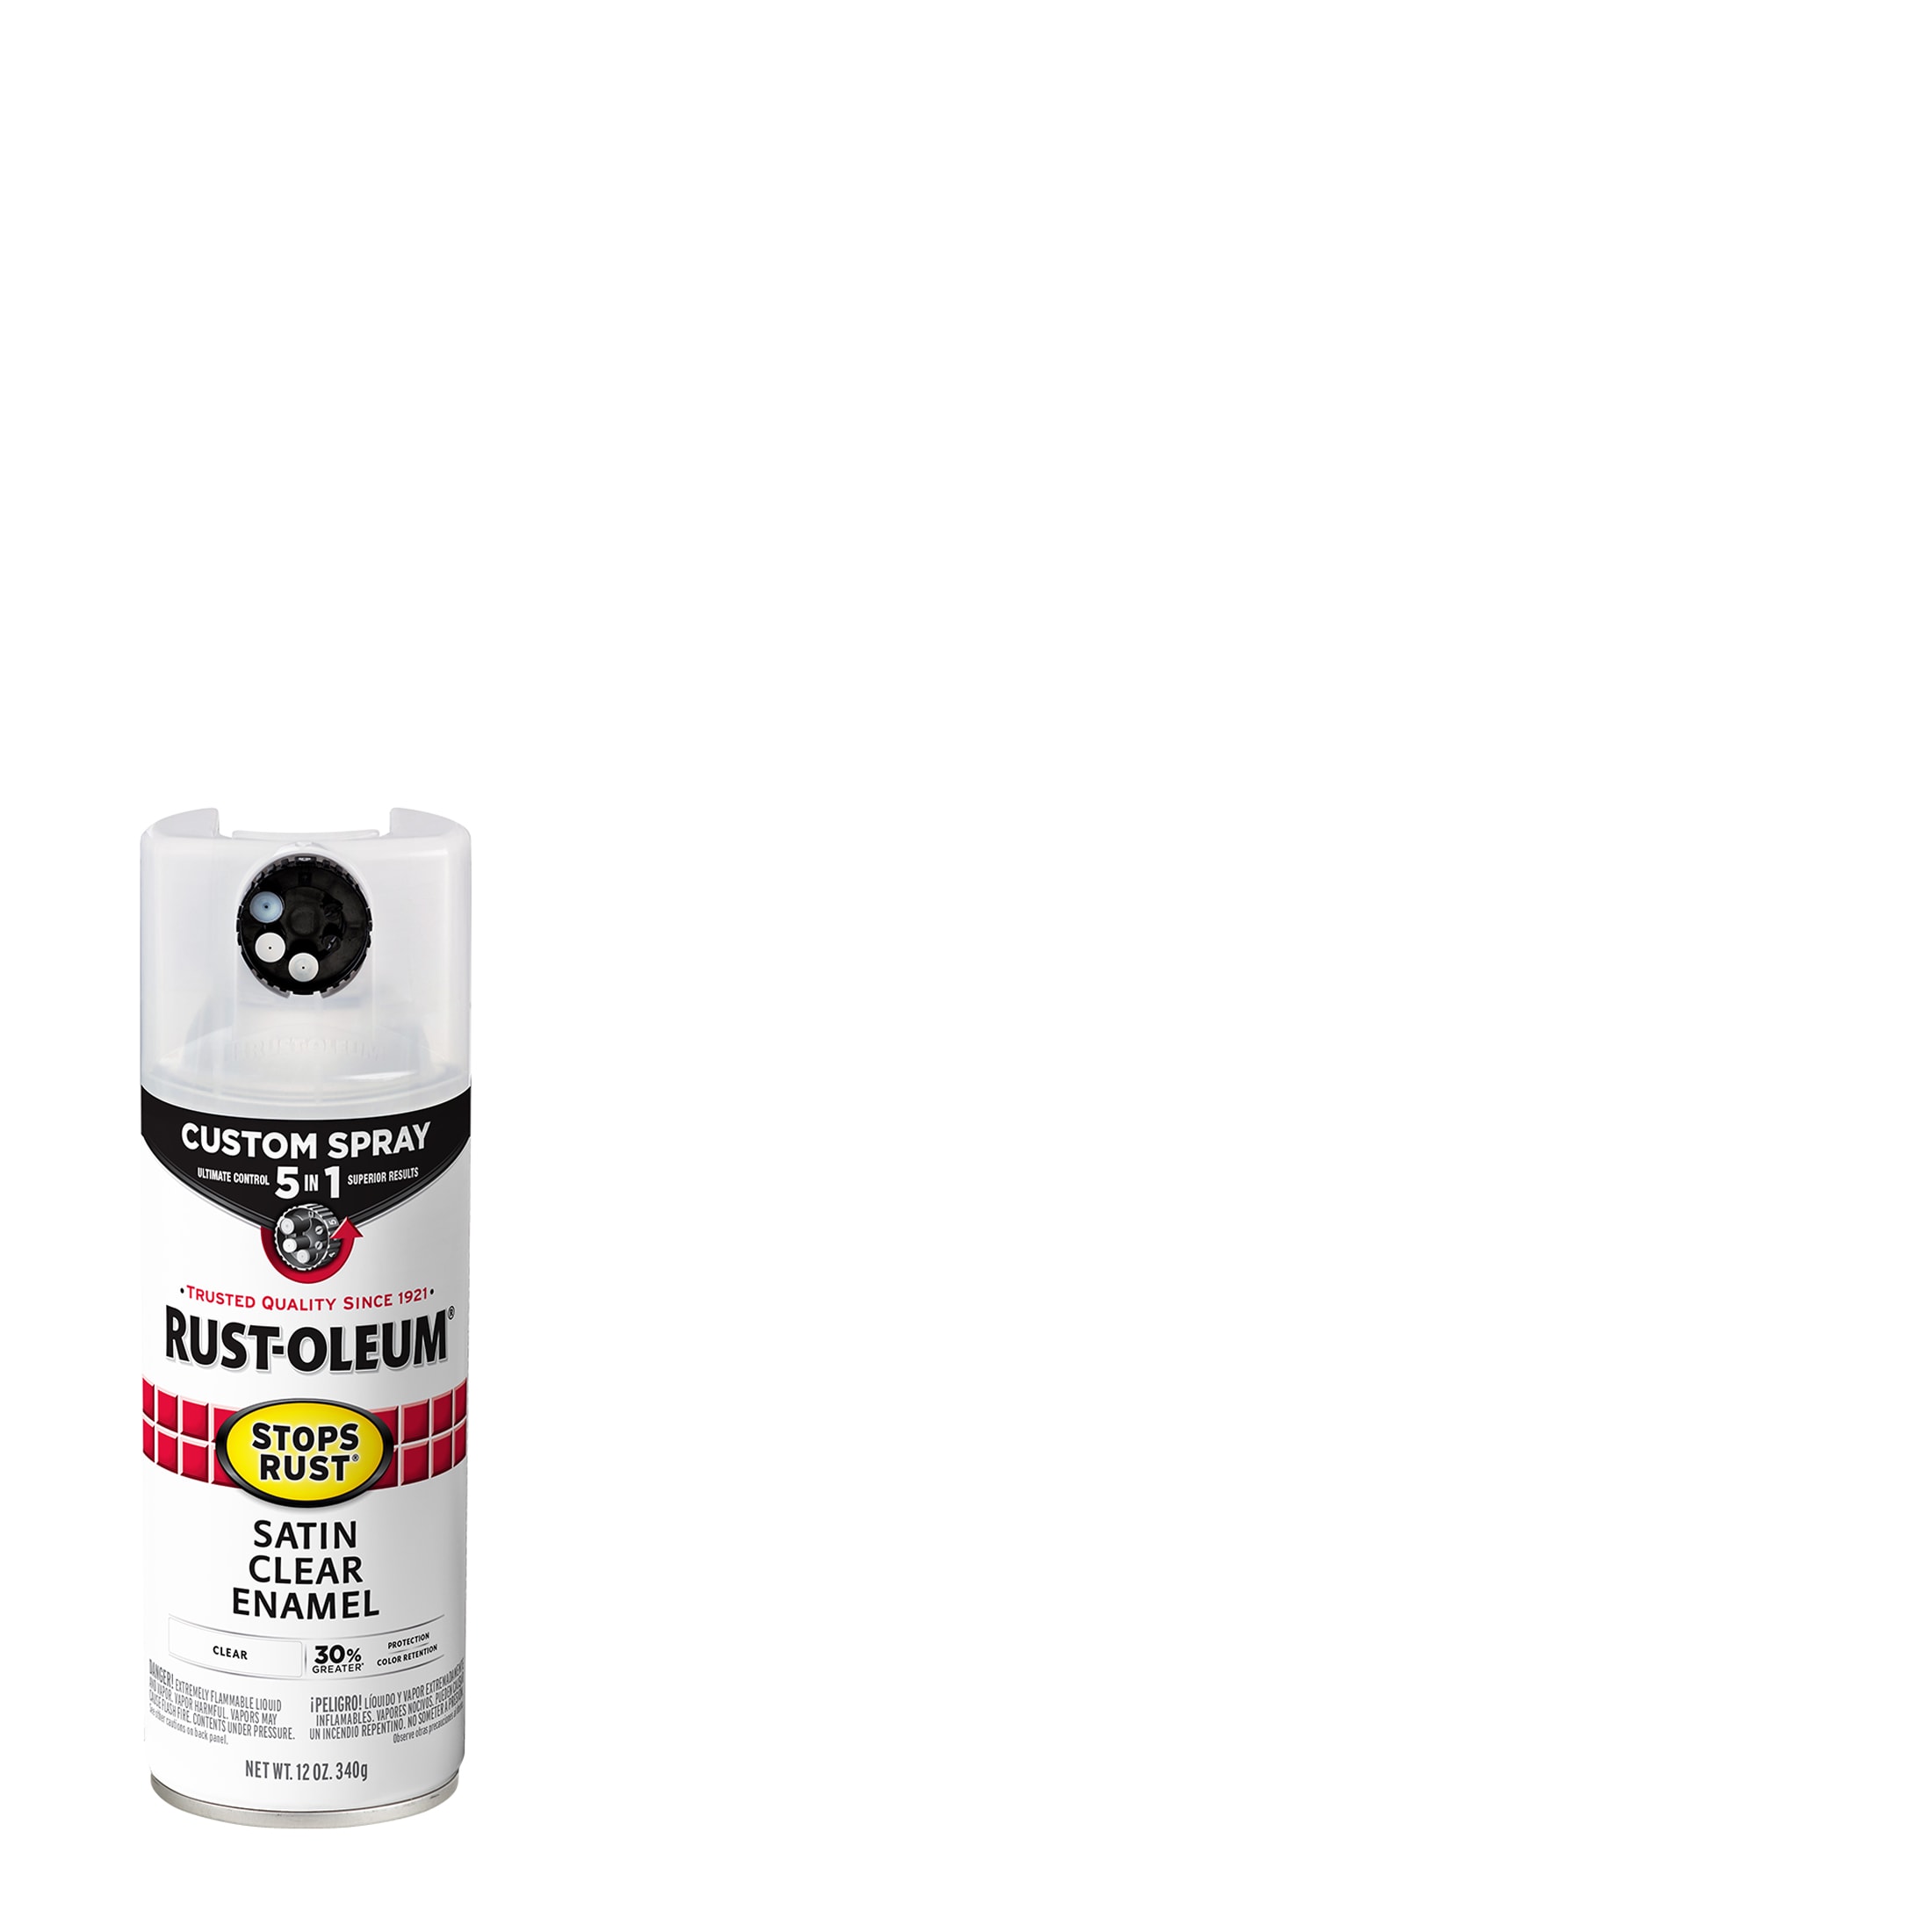 Rust-Oleum Specialty 11 oz. Frosted Glass Spray Paint 342600 - The